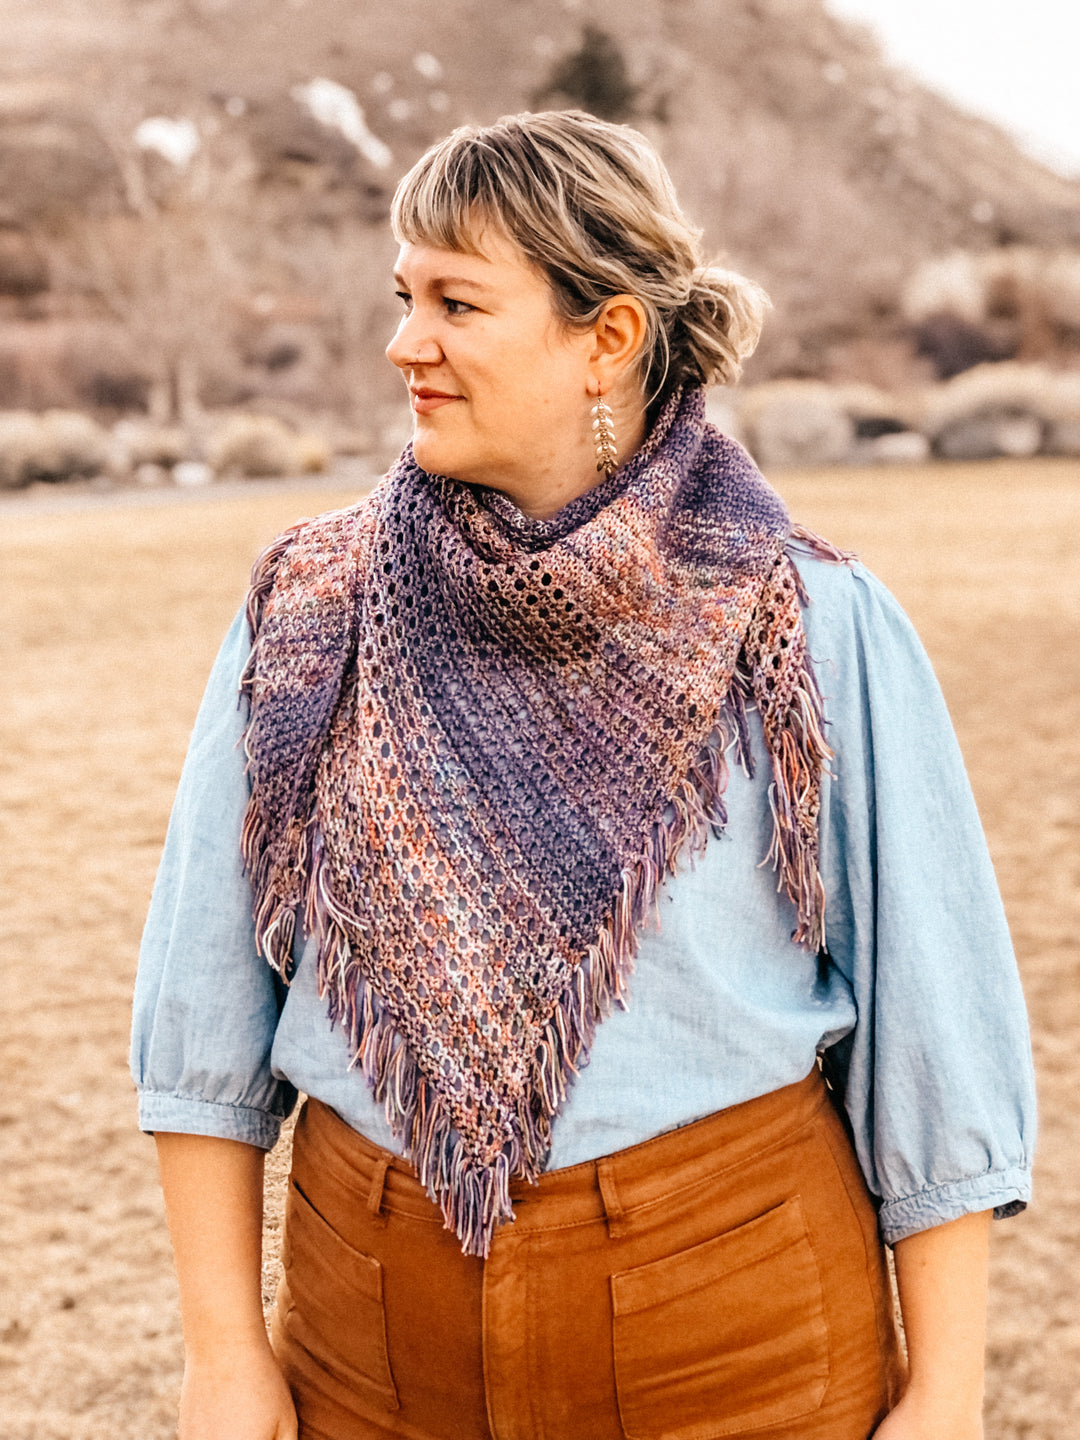 A textured and eyelet shawl with fringe in orange, purple and blue faded yarn, worn by a light-skinned woman standing in front of a mountain.